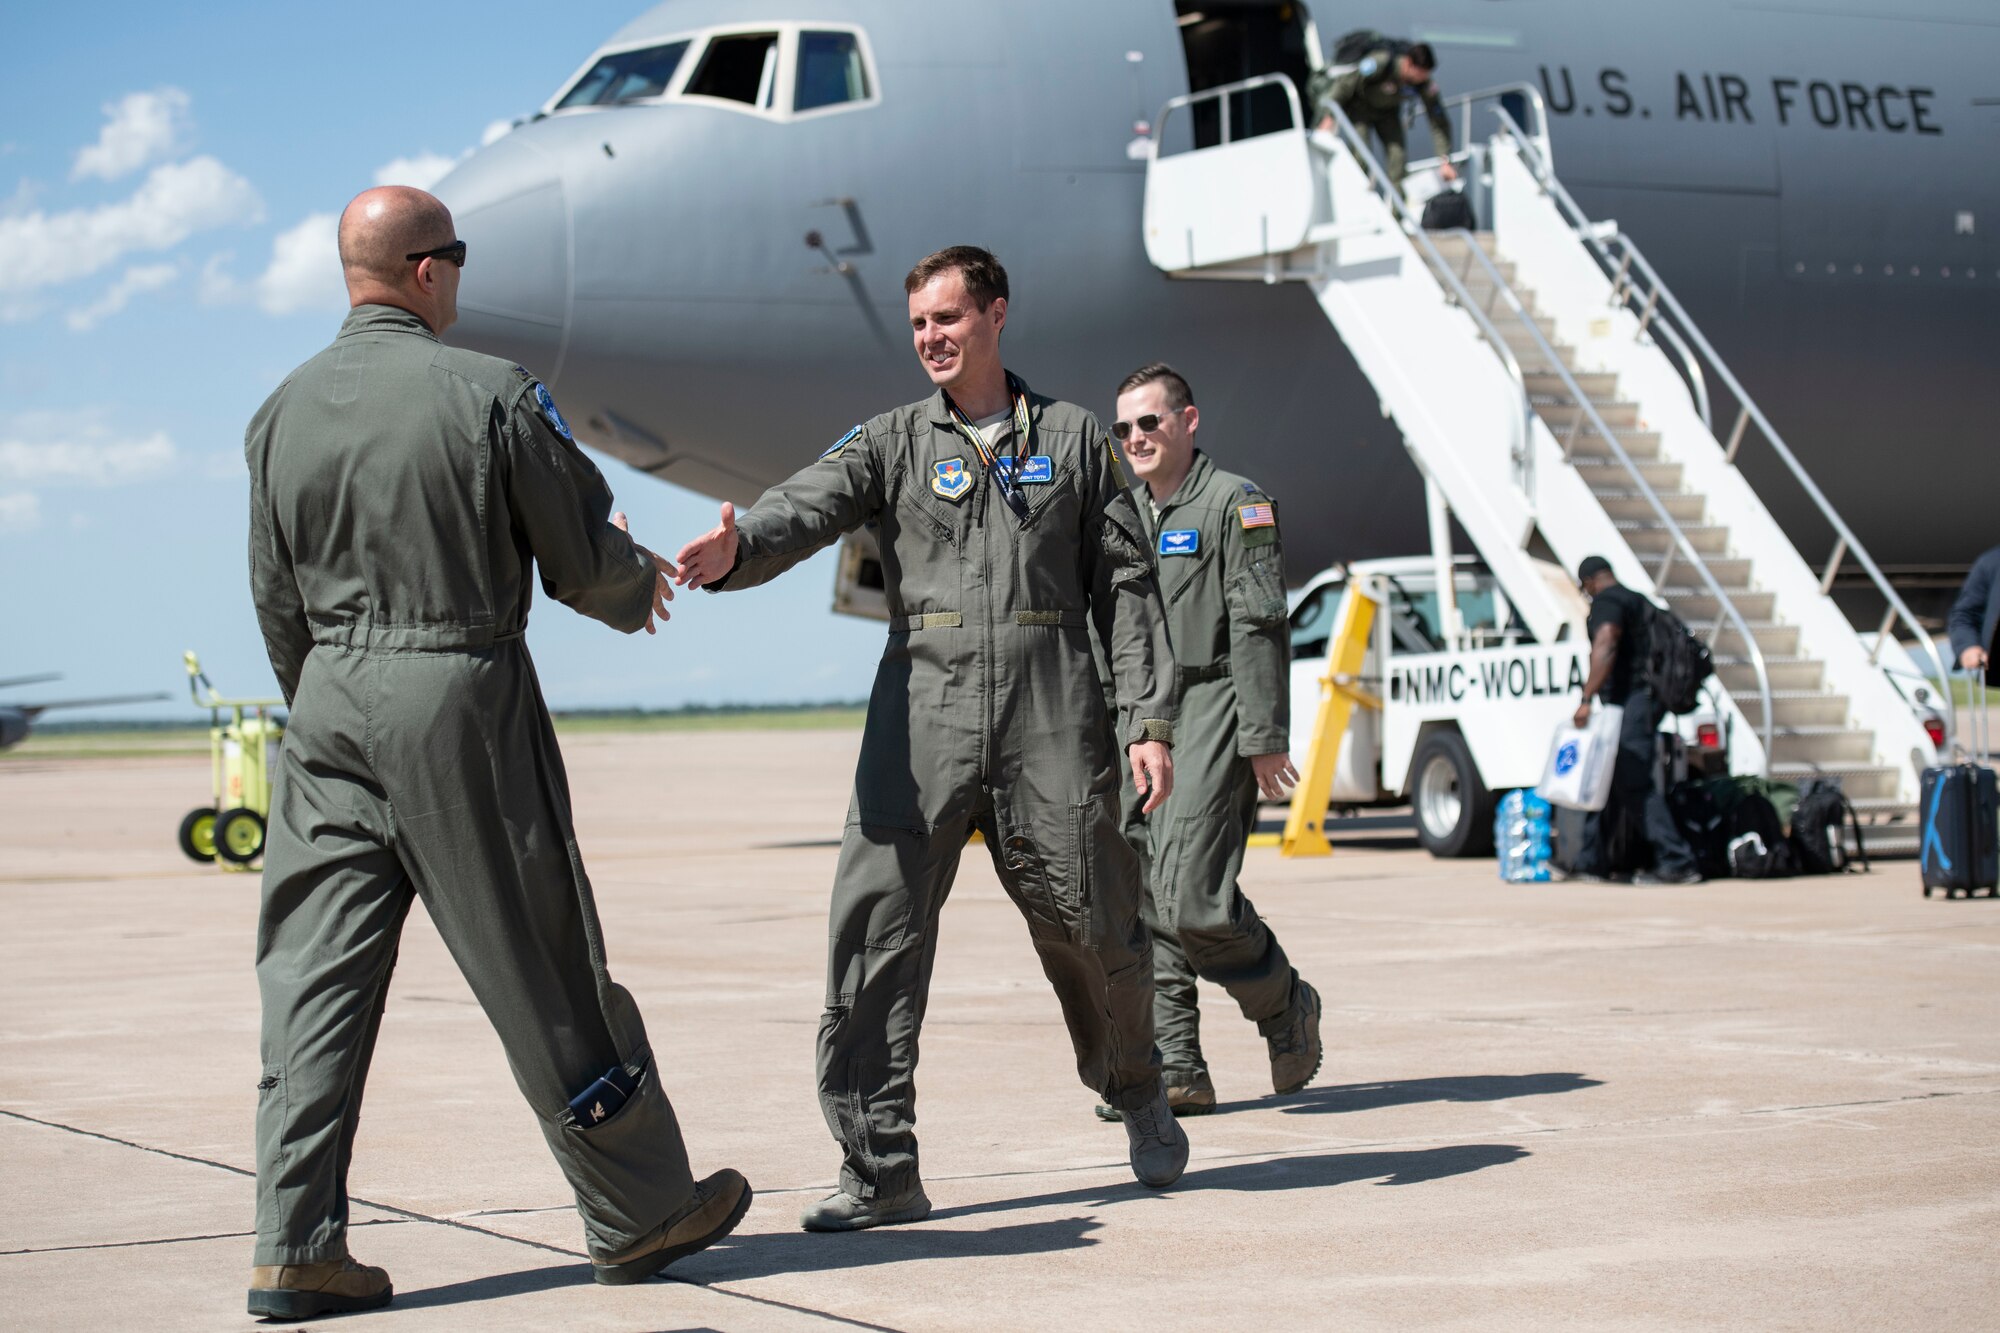 U.S. Air Force Col. Eric Carney, 97th Air Mobility Wing Commander, greets the crew from a newly arrived KC-46 Pegasus, May 18, 2019, at Altus Air Force Base, Okla. The two additional KC-46s are an important addition to the 97th AMW’s ability to deliver 21st century airpower. (U.S. Air Force photo by Airman 1st Class Breanna Klemm)